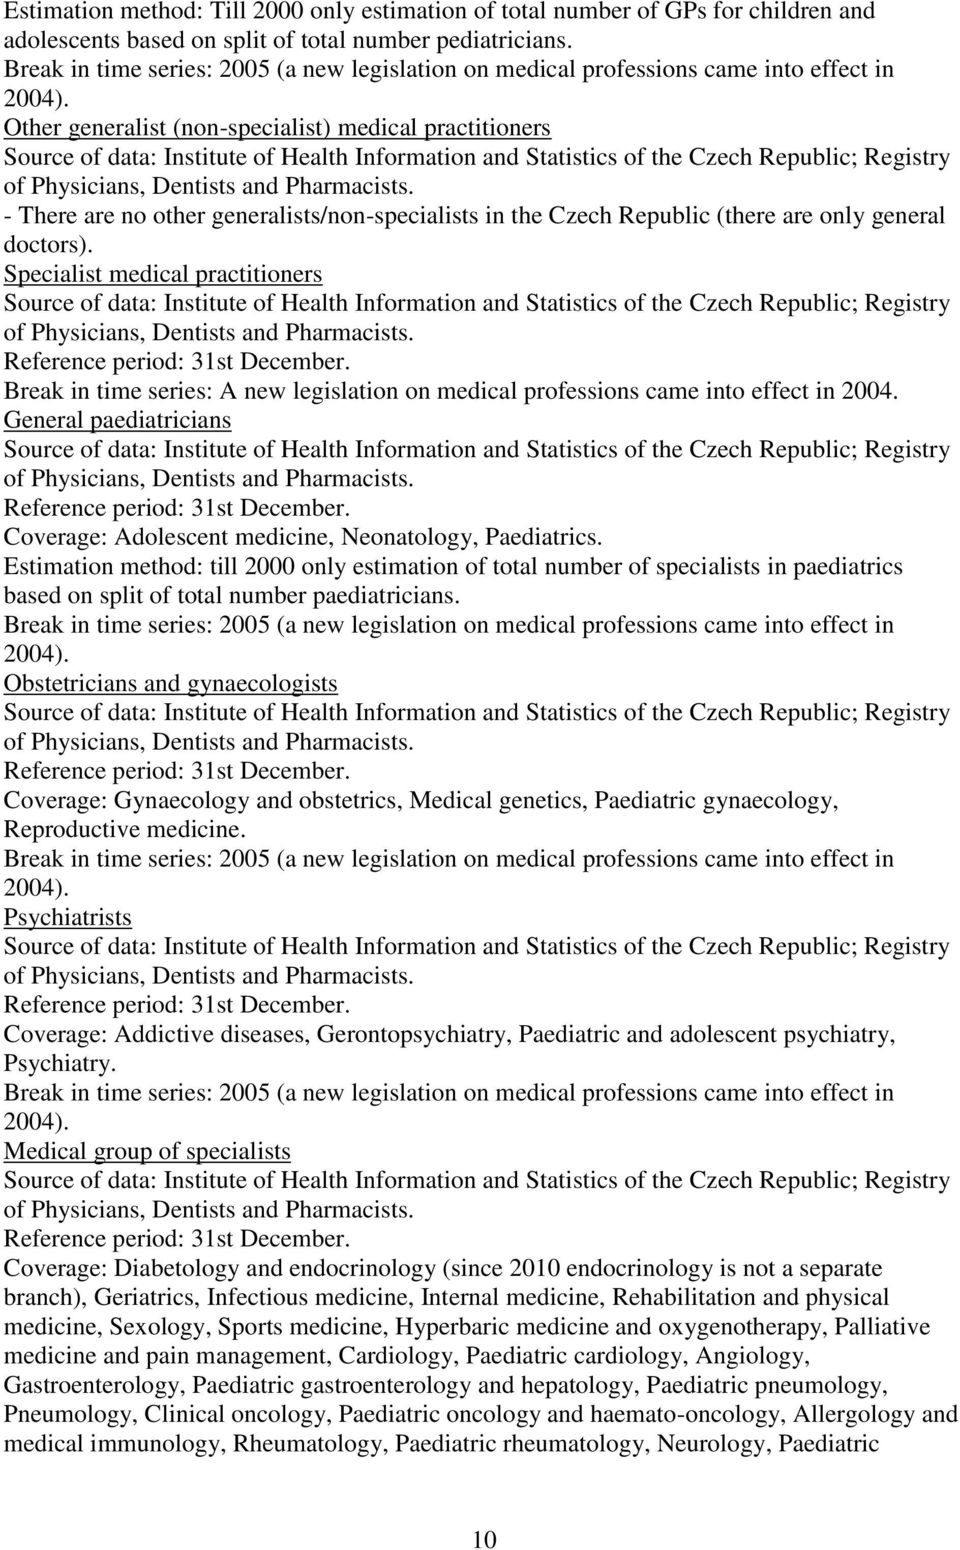 Other generalist (non-specialist) medical practitioners Institute of Health Information and Statistics of the Czech Republic; Registry of Physicians, Dentists and Pharmacists.